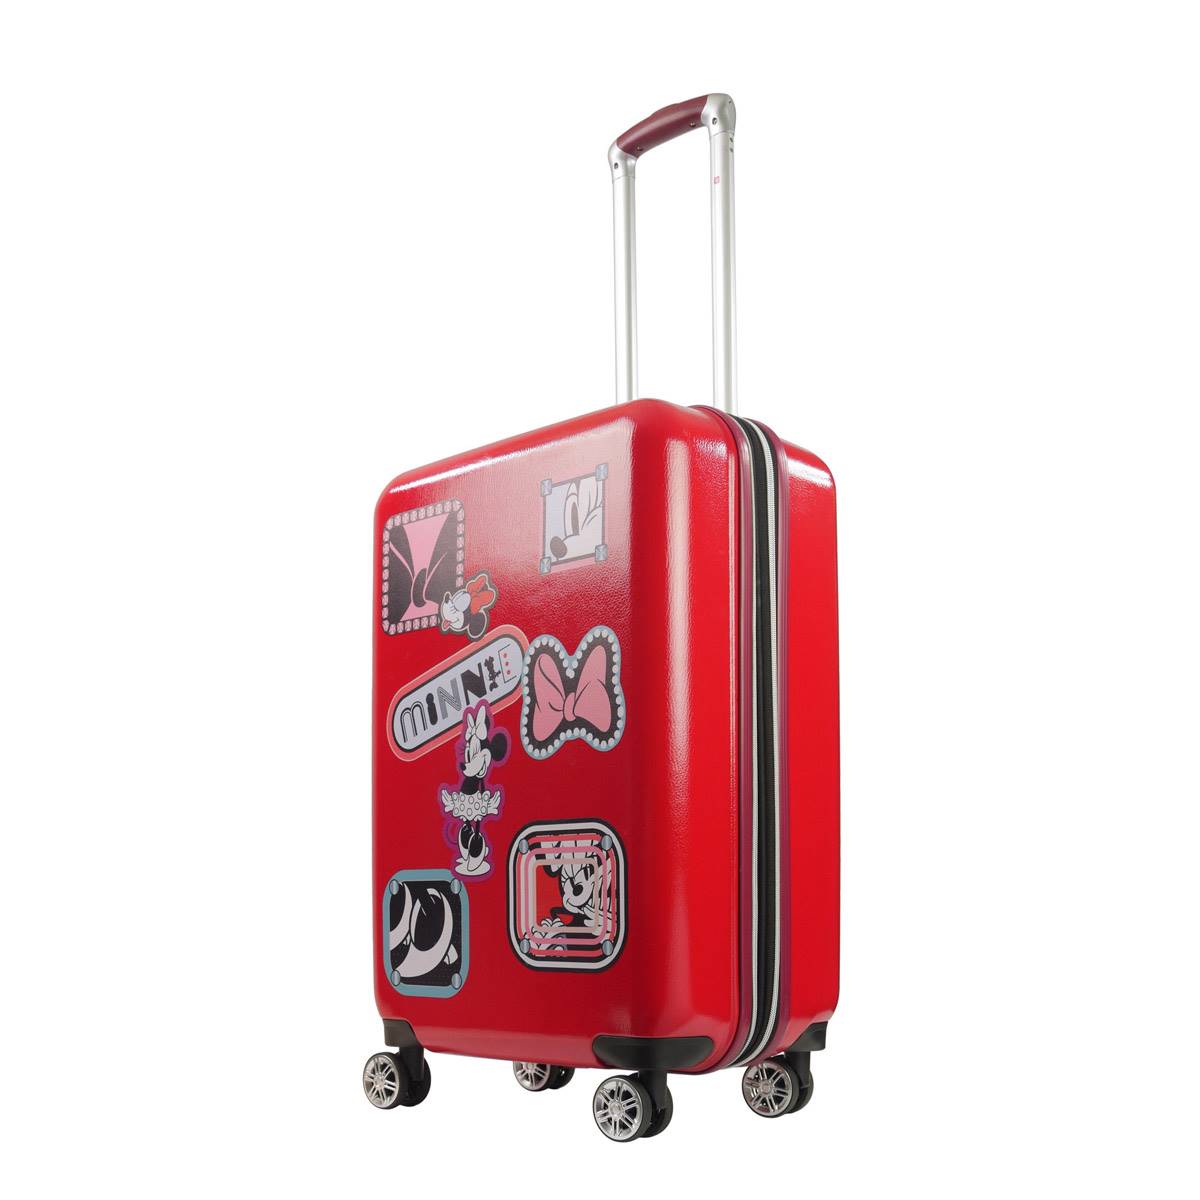 FUL Minnie Mouse 25in. Patch Design Hardside Luggage